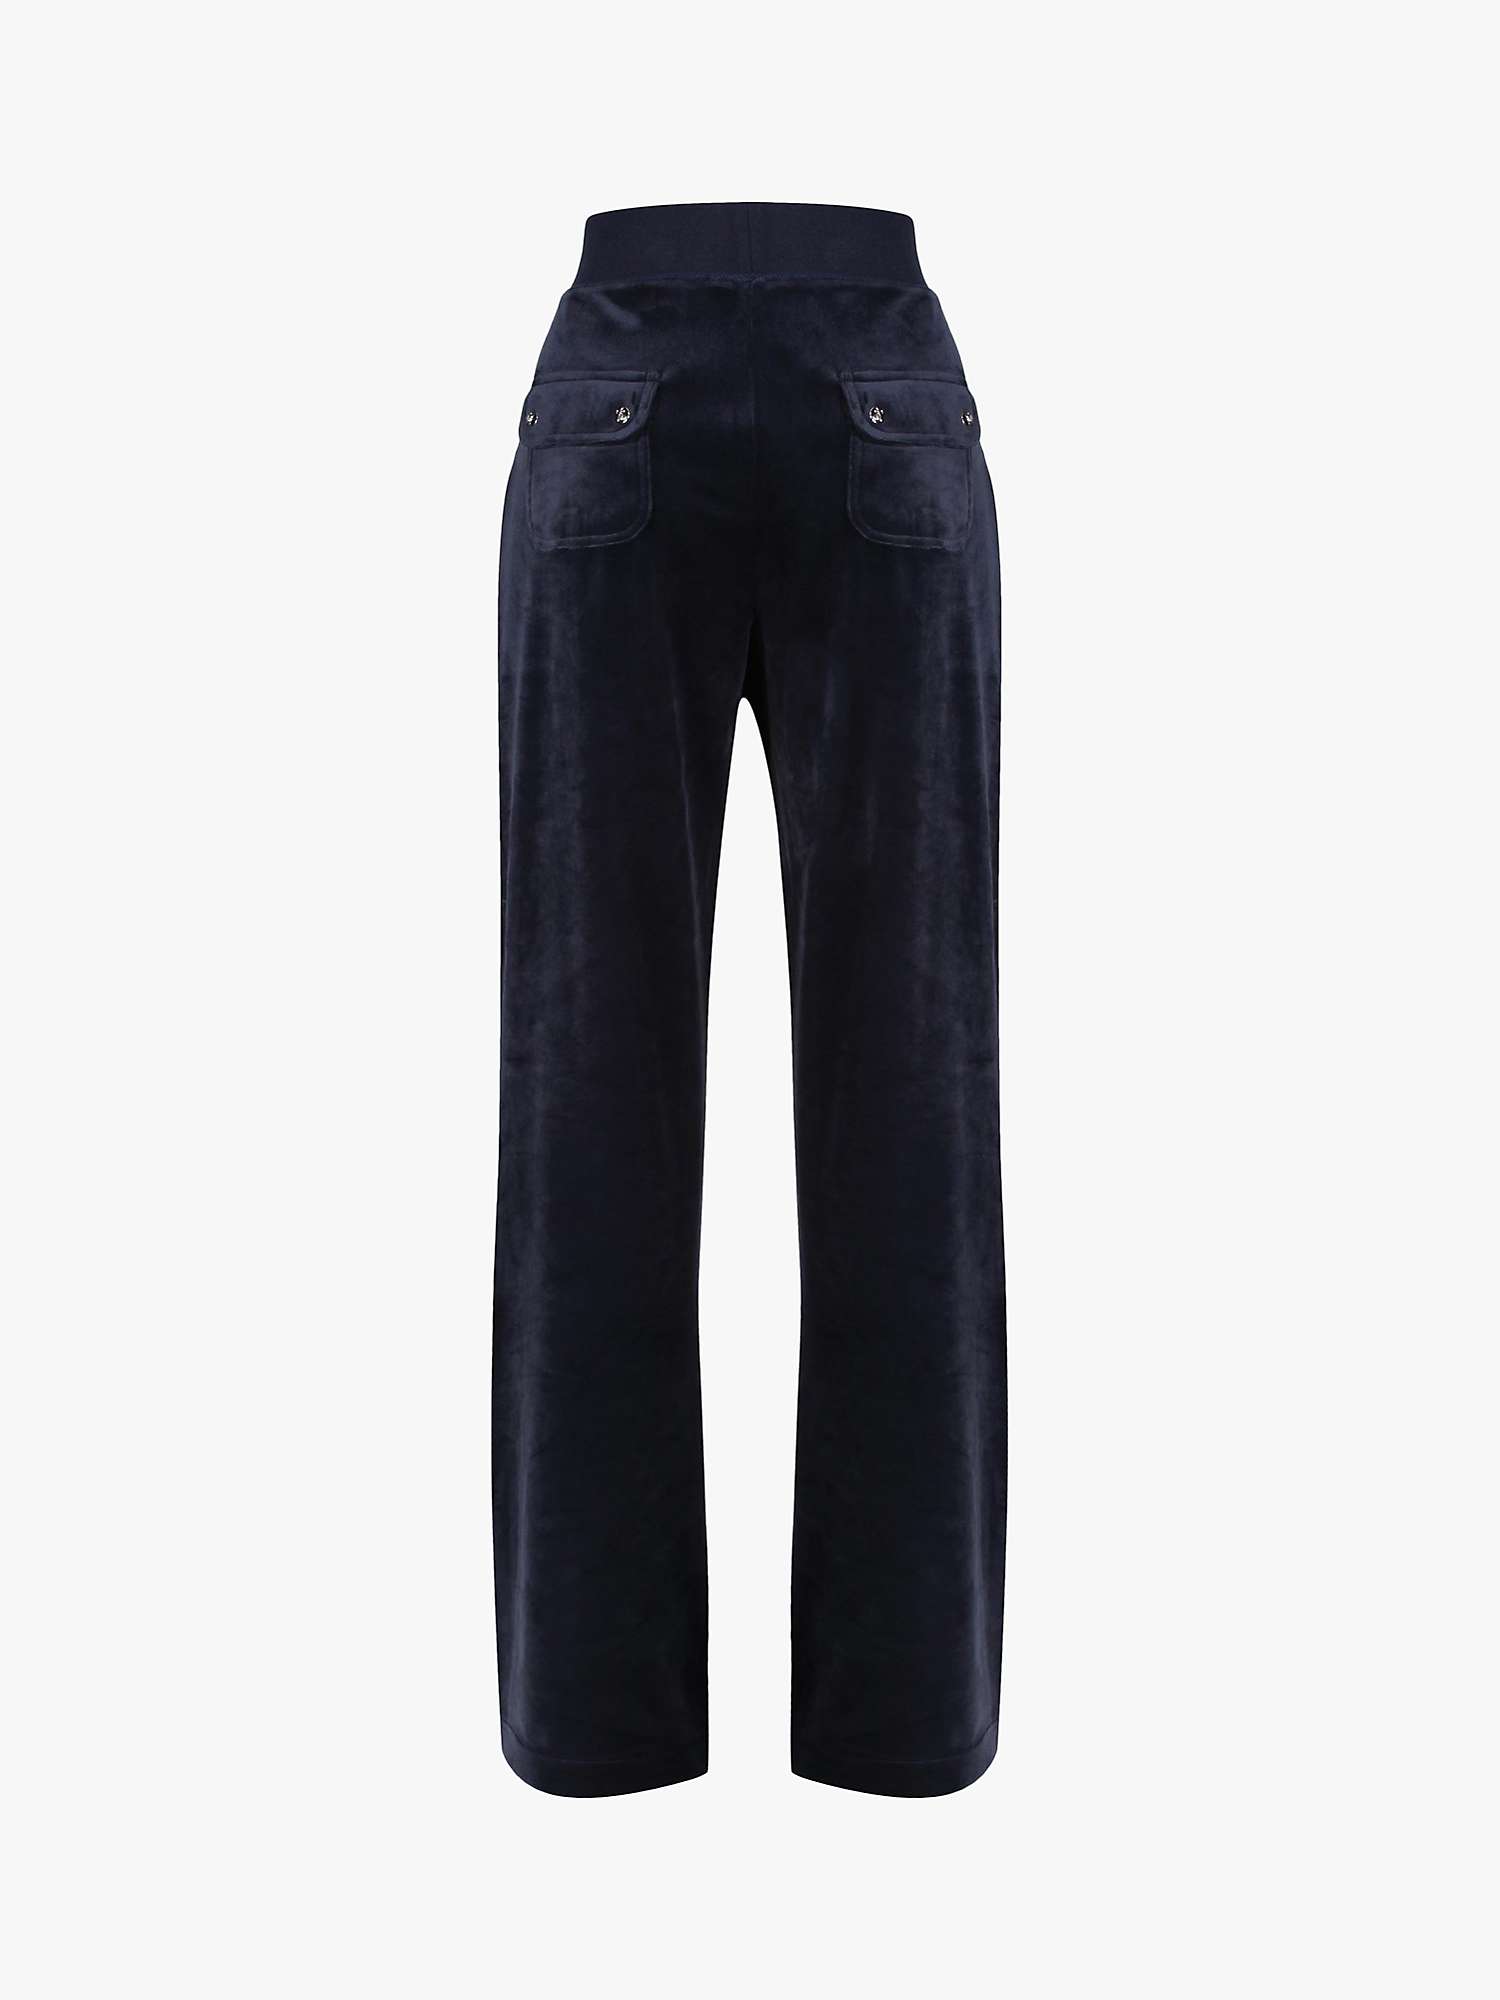 Buy Juicy Couture Del Ray Tracksuit Bottoms Online at johnlewis.com